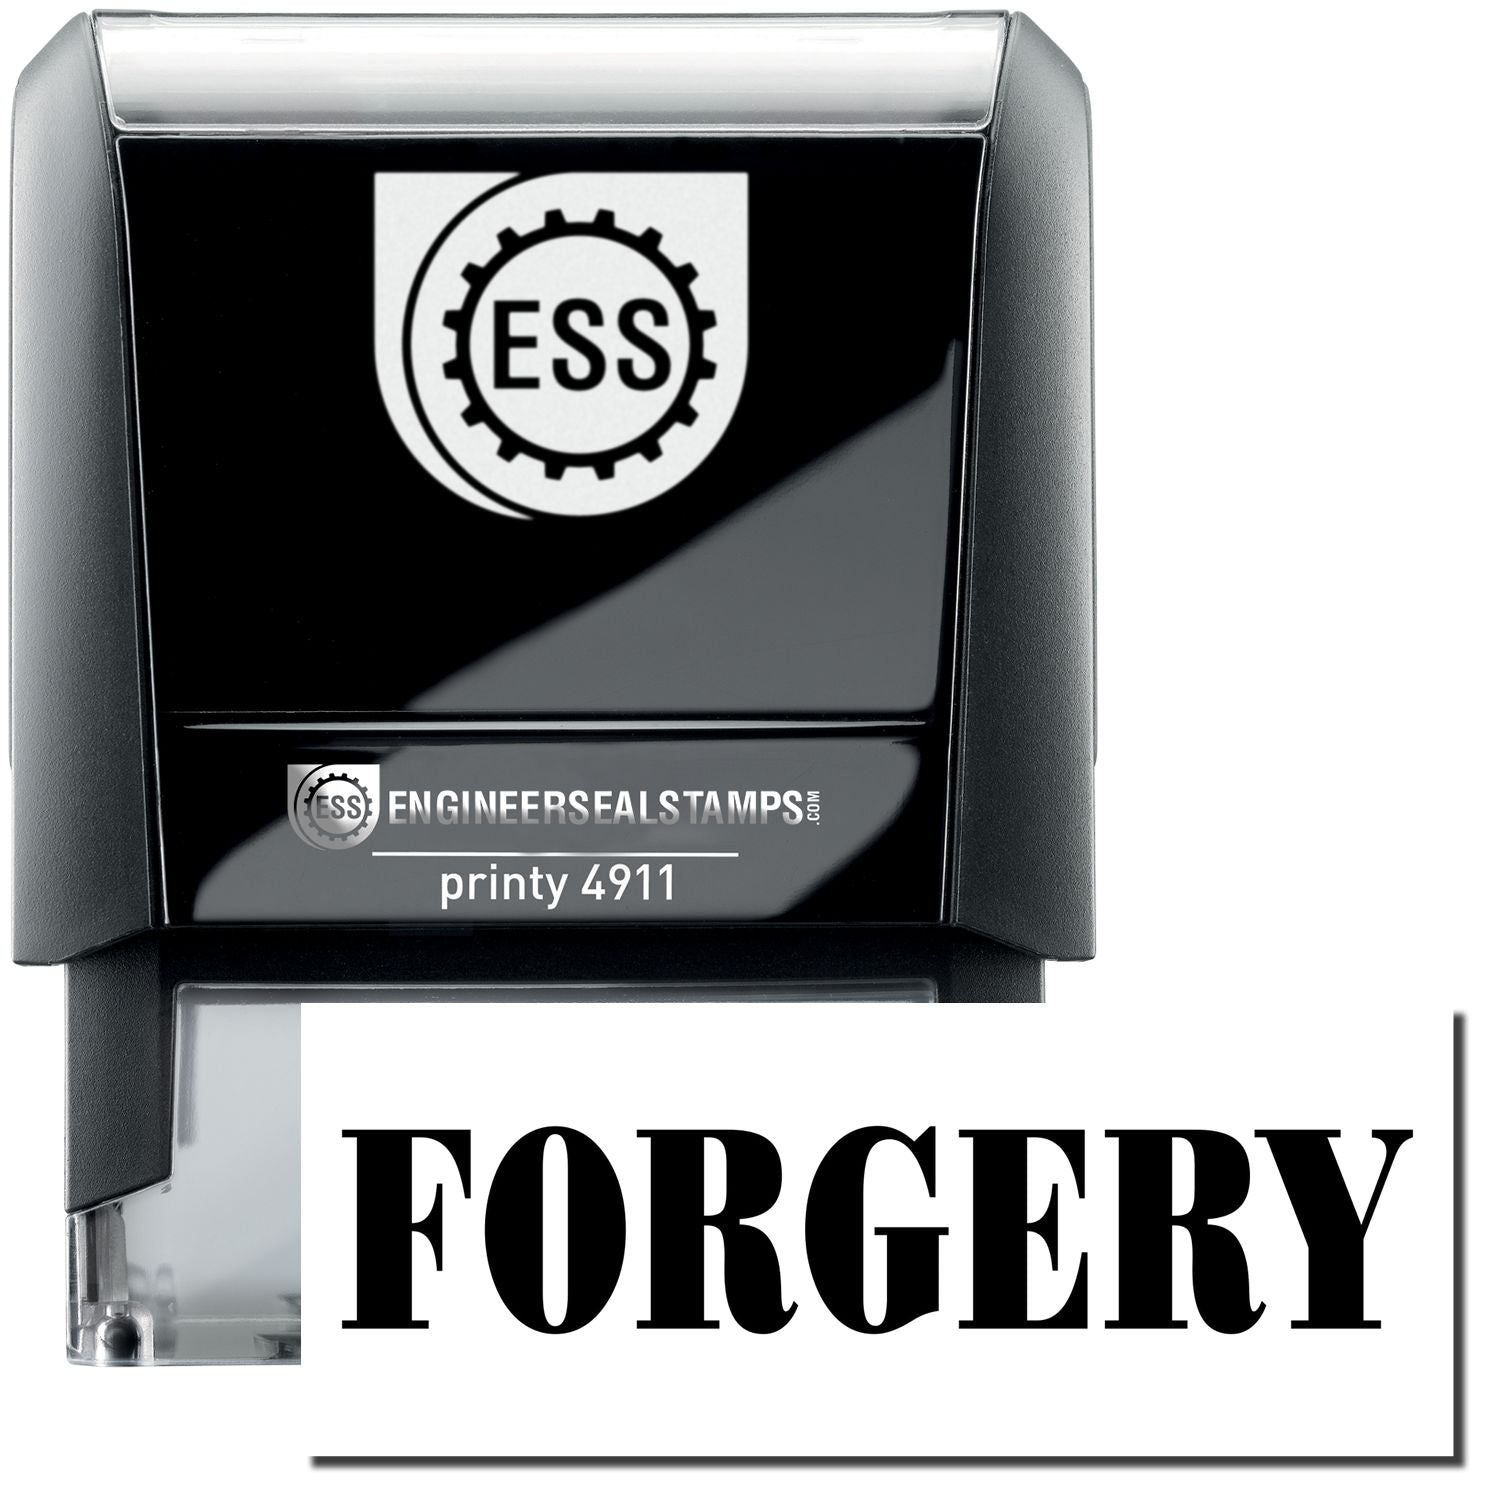 A self-inking stamp with a stamped image showing how the text "FORGERY" is displayed after stamping.